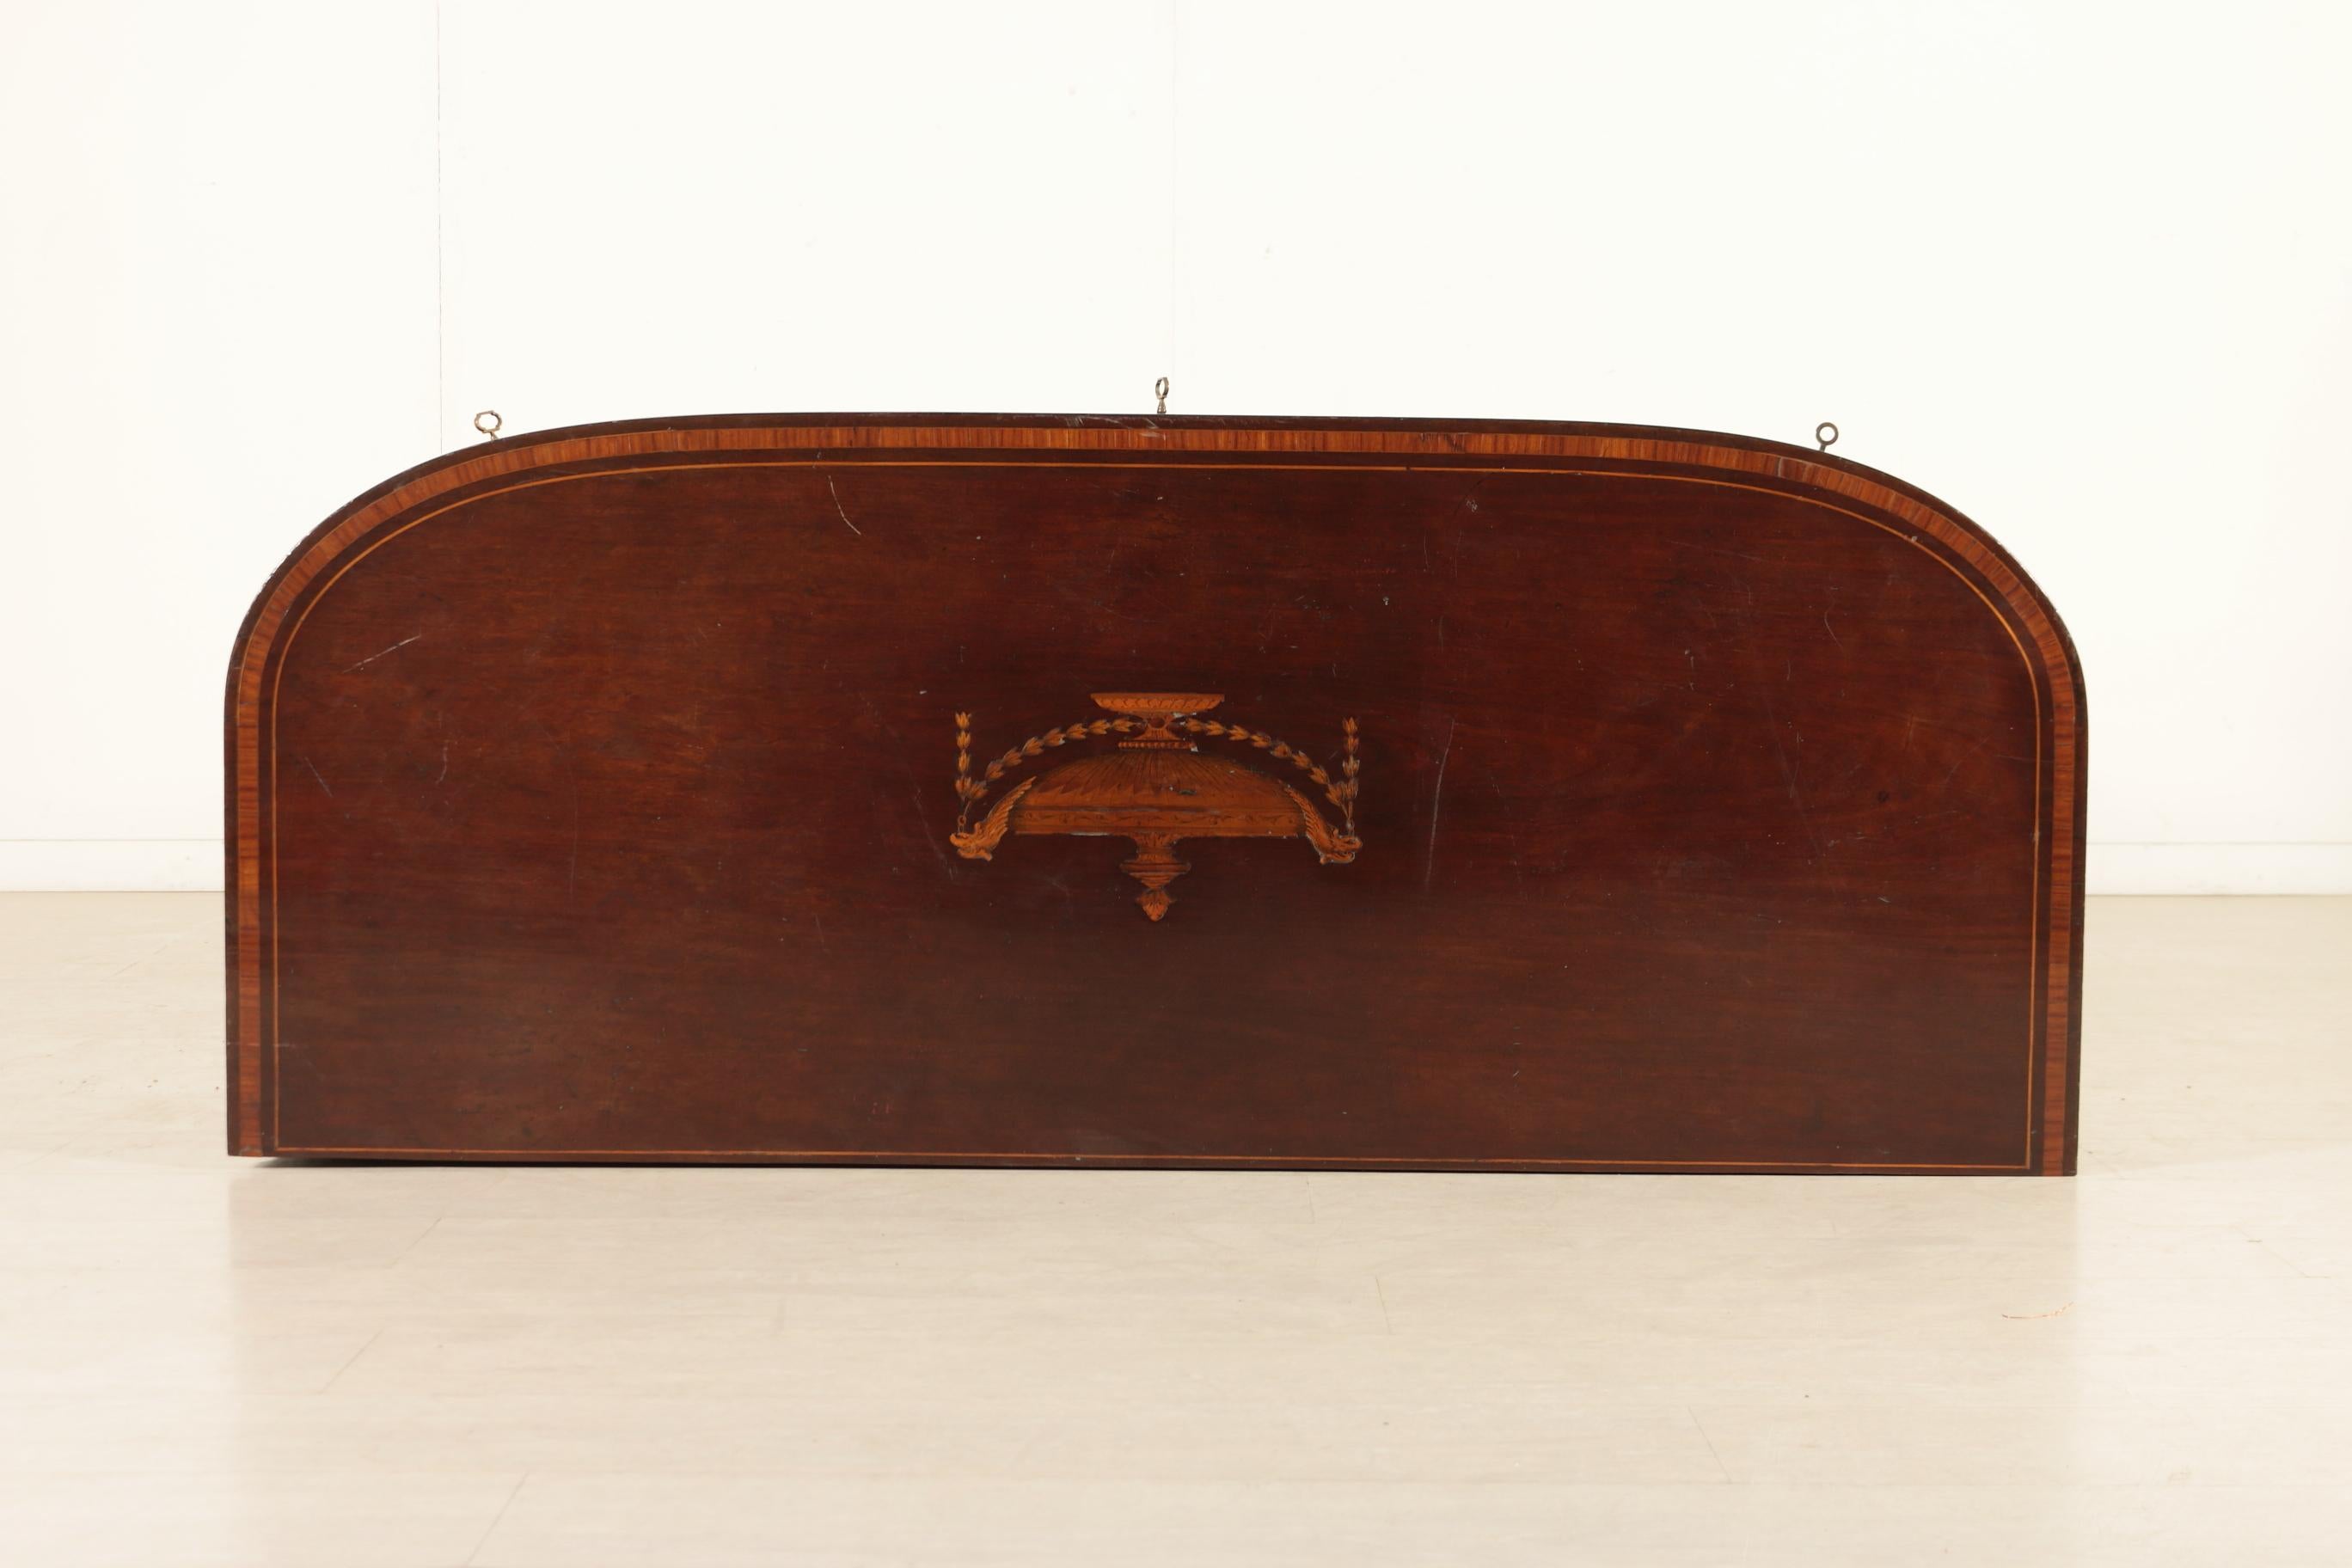 Sideboard veneered in mahogany, has two doors and two drawers with neoclassical inlays in various woods, top has a thread and inlay with motifs taken from the Adams models. Truncated pyramidal legs. Late 1800s, England.

Packaging with bubble wrap